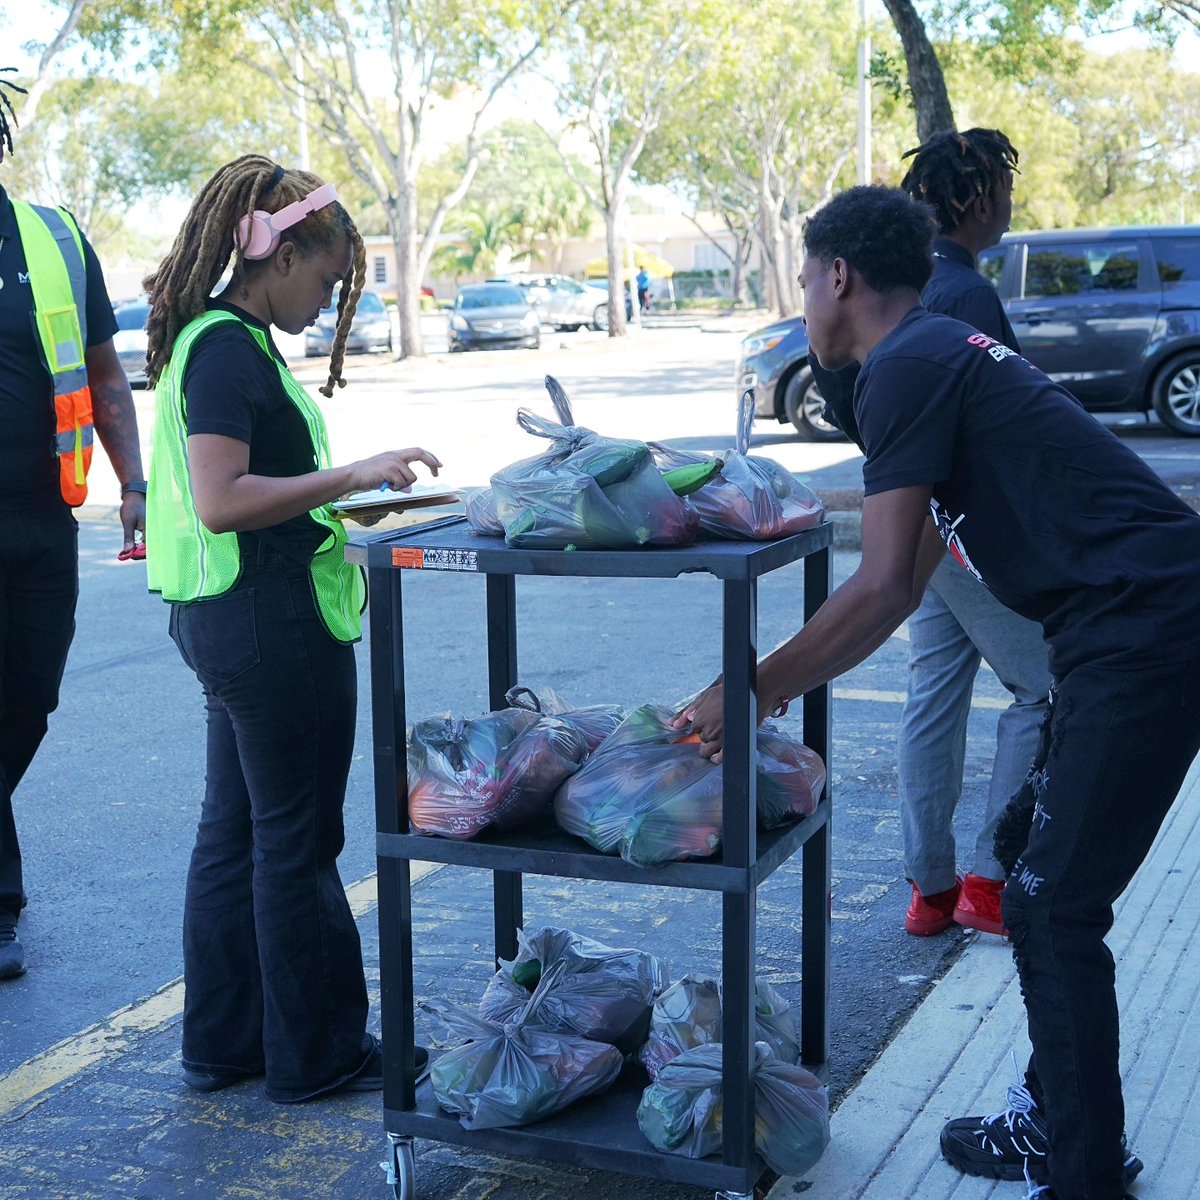 We are thankful for our partners who supplied us with fresh produce to distribute to over 100 families this Wednesday. 🌱❤️ 📍Liberty City Campus #mlmpipa #tta #educationmatters #learningtogether #communityconnection #familysupport #gratefulheart #togetherwegrow